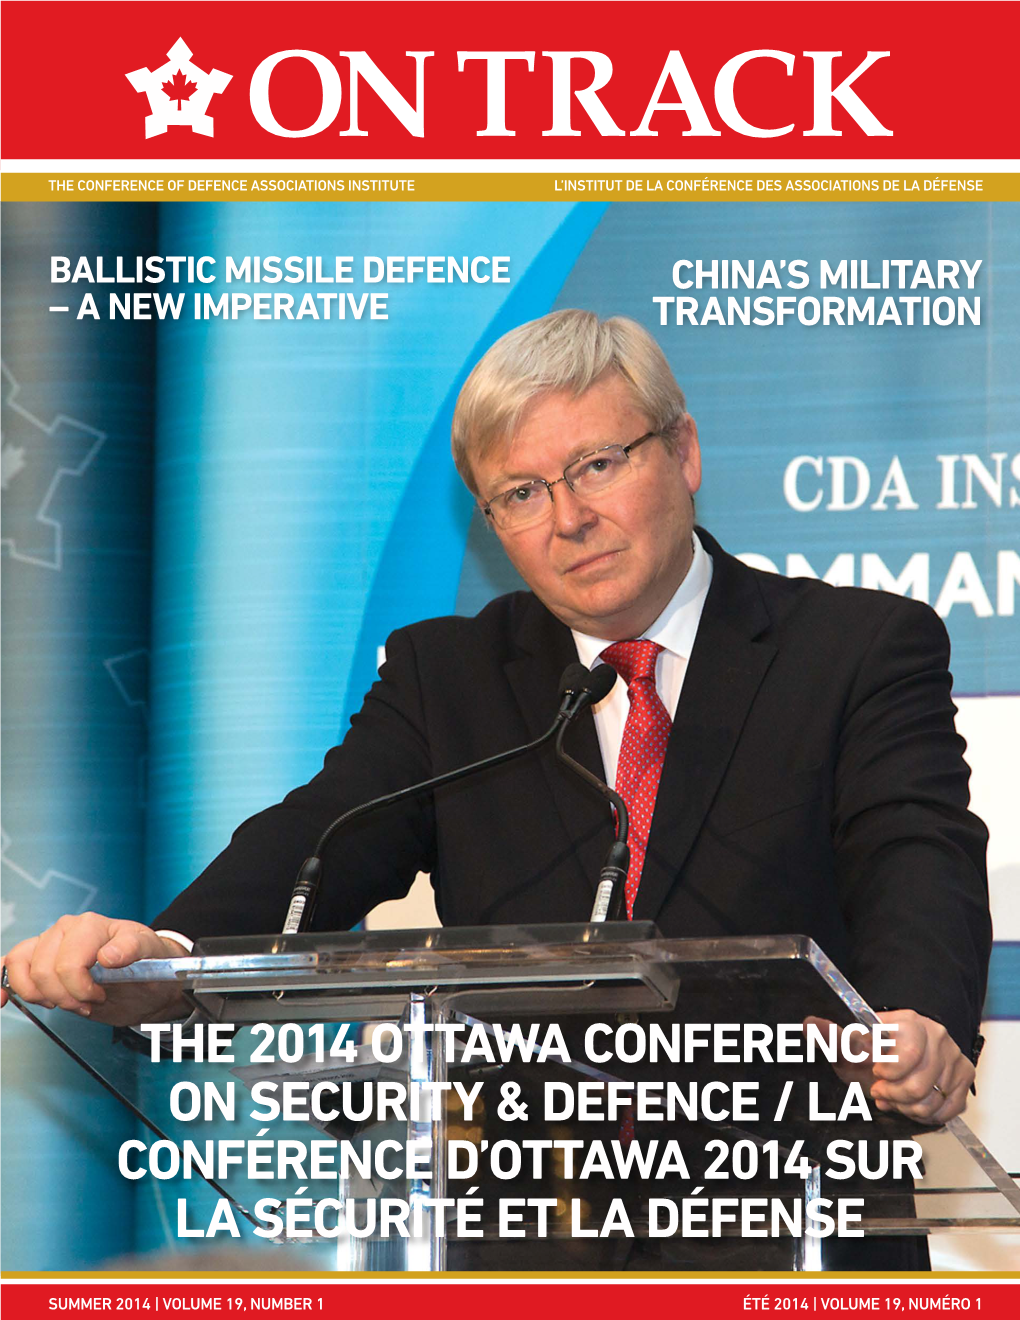 The 2014 Ottawa Conference on Security & Defence / La